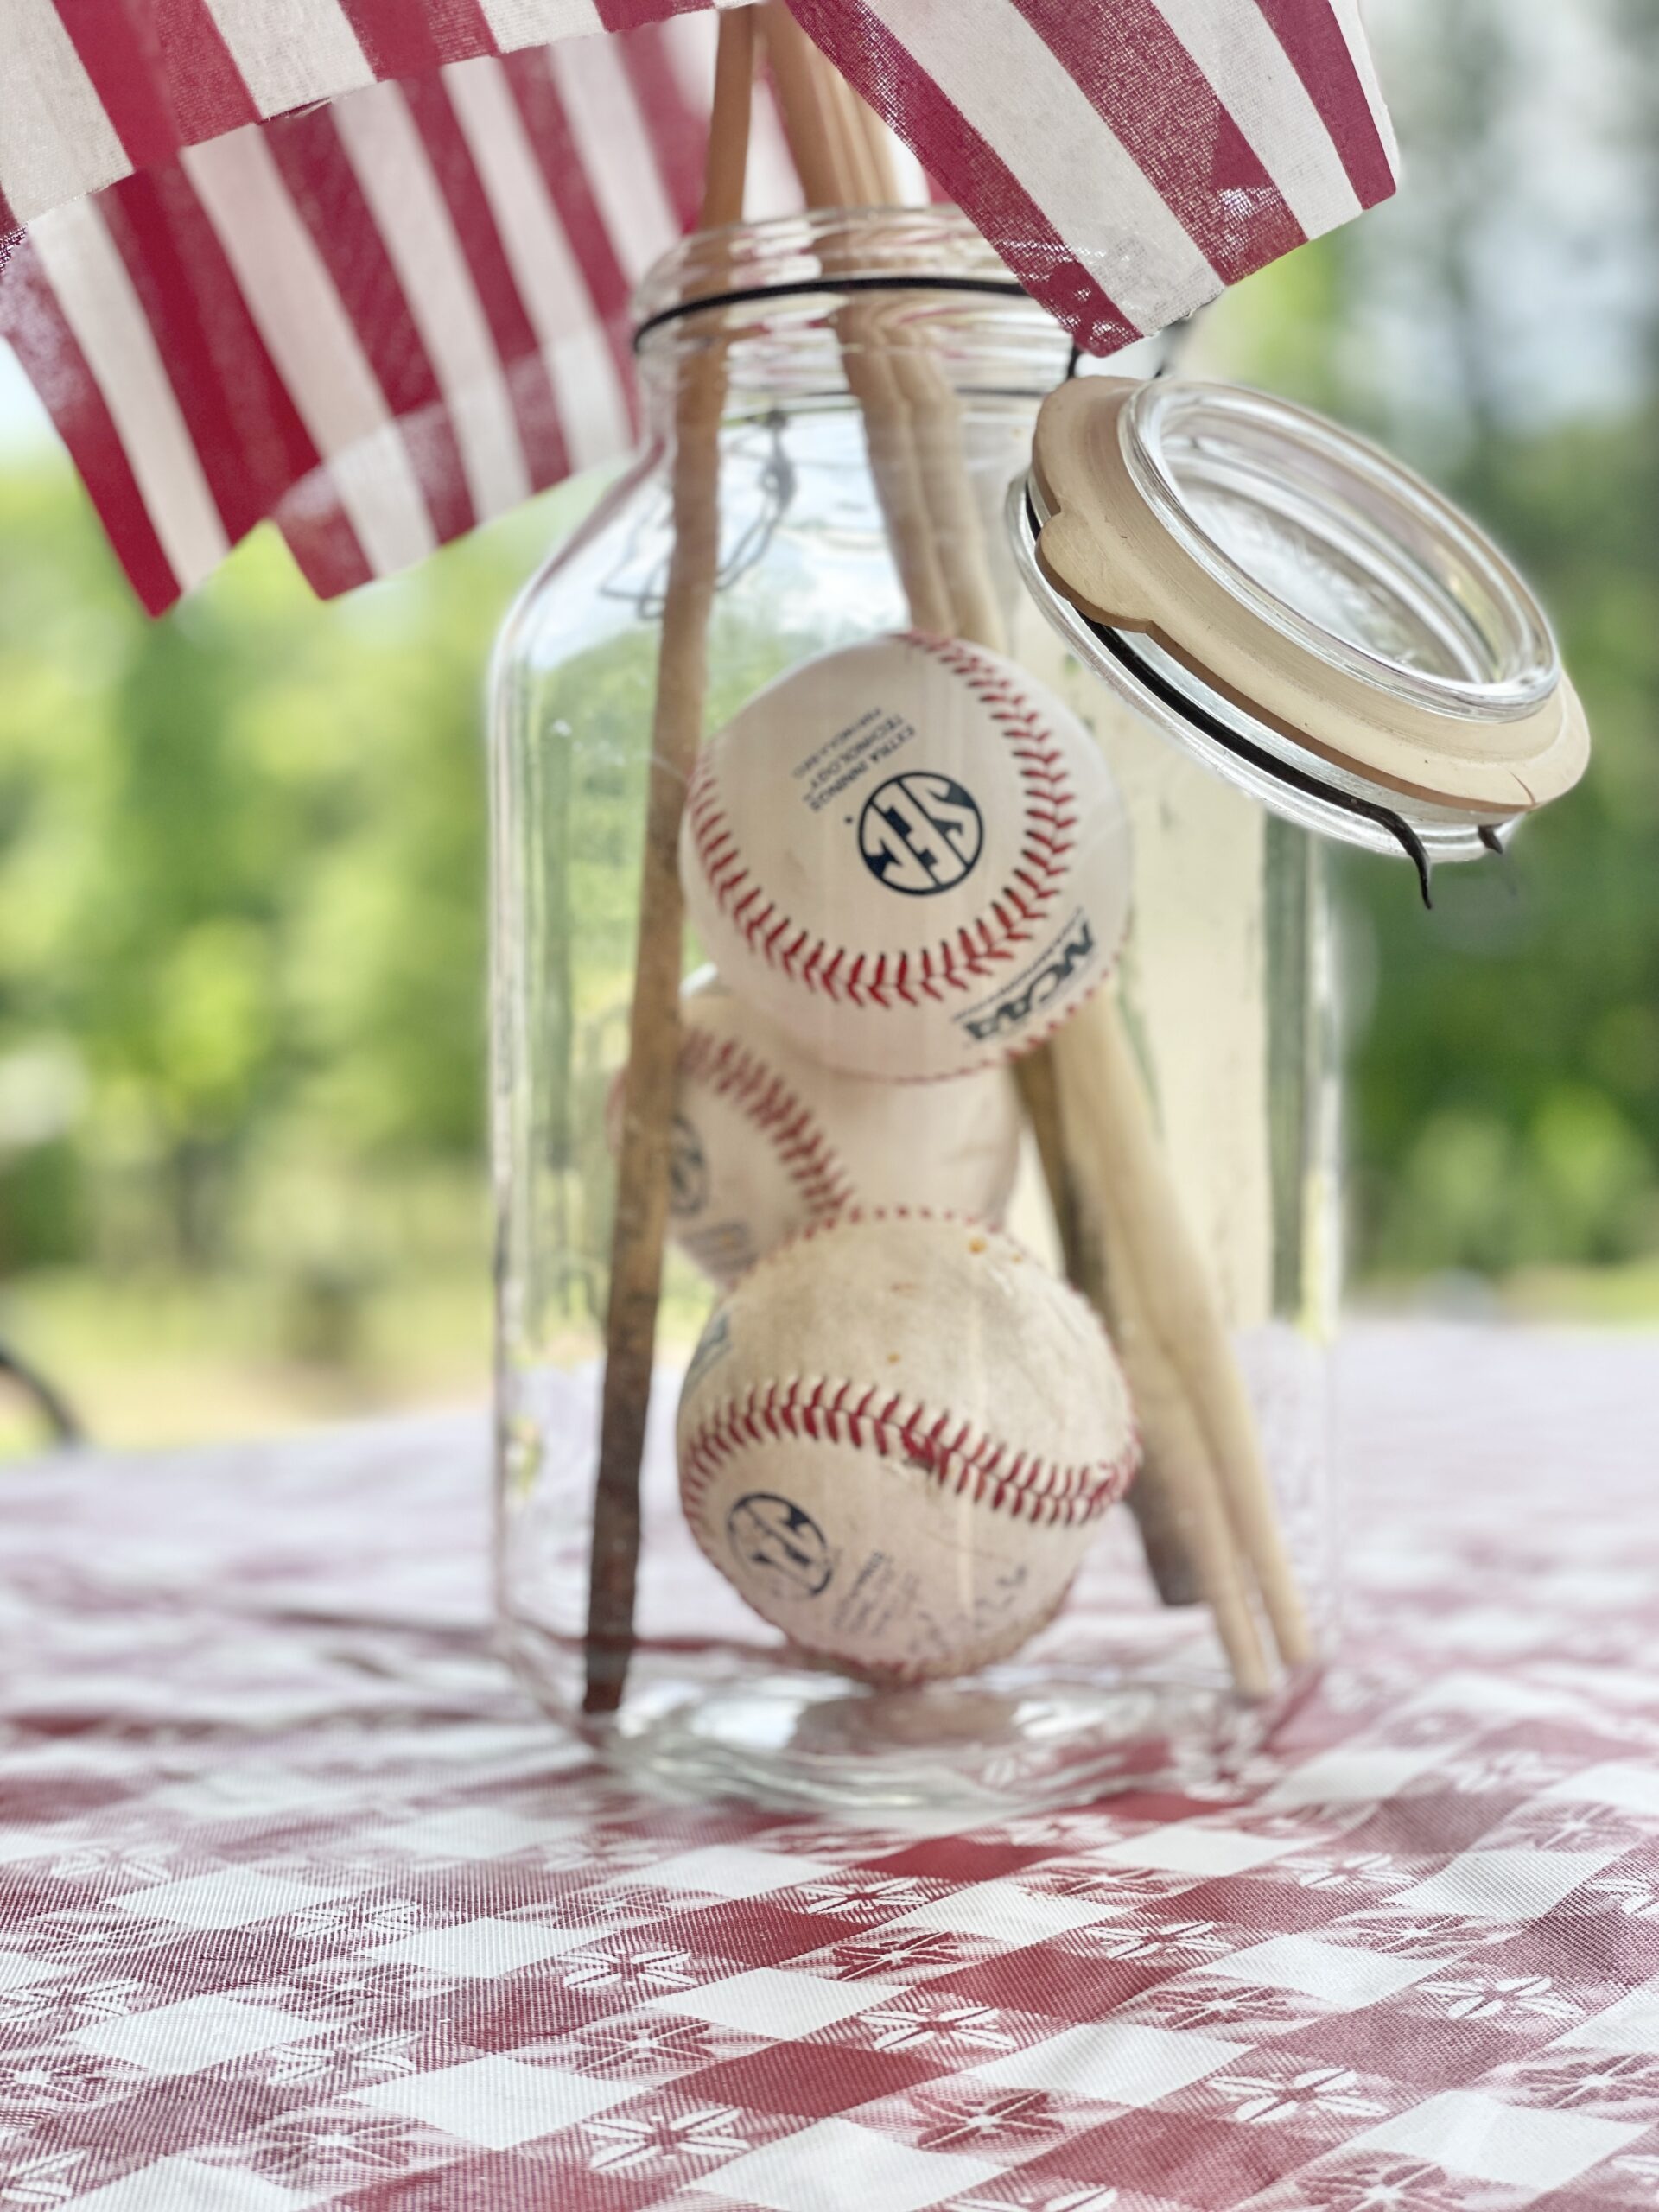 Clear jar filled with baseballs. American flags on sticks tucked into the glass jar with the baseballs. Created a red, white and blue easy centerpiece for the middle of any Summer table. Placed it all on top of a white and red check table cloth.